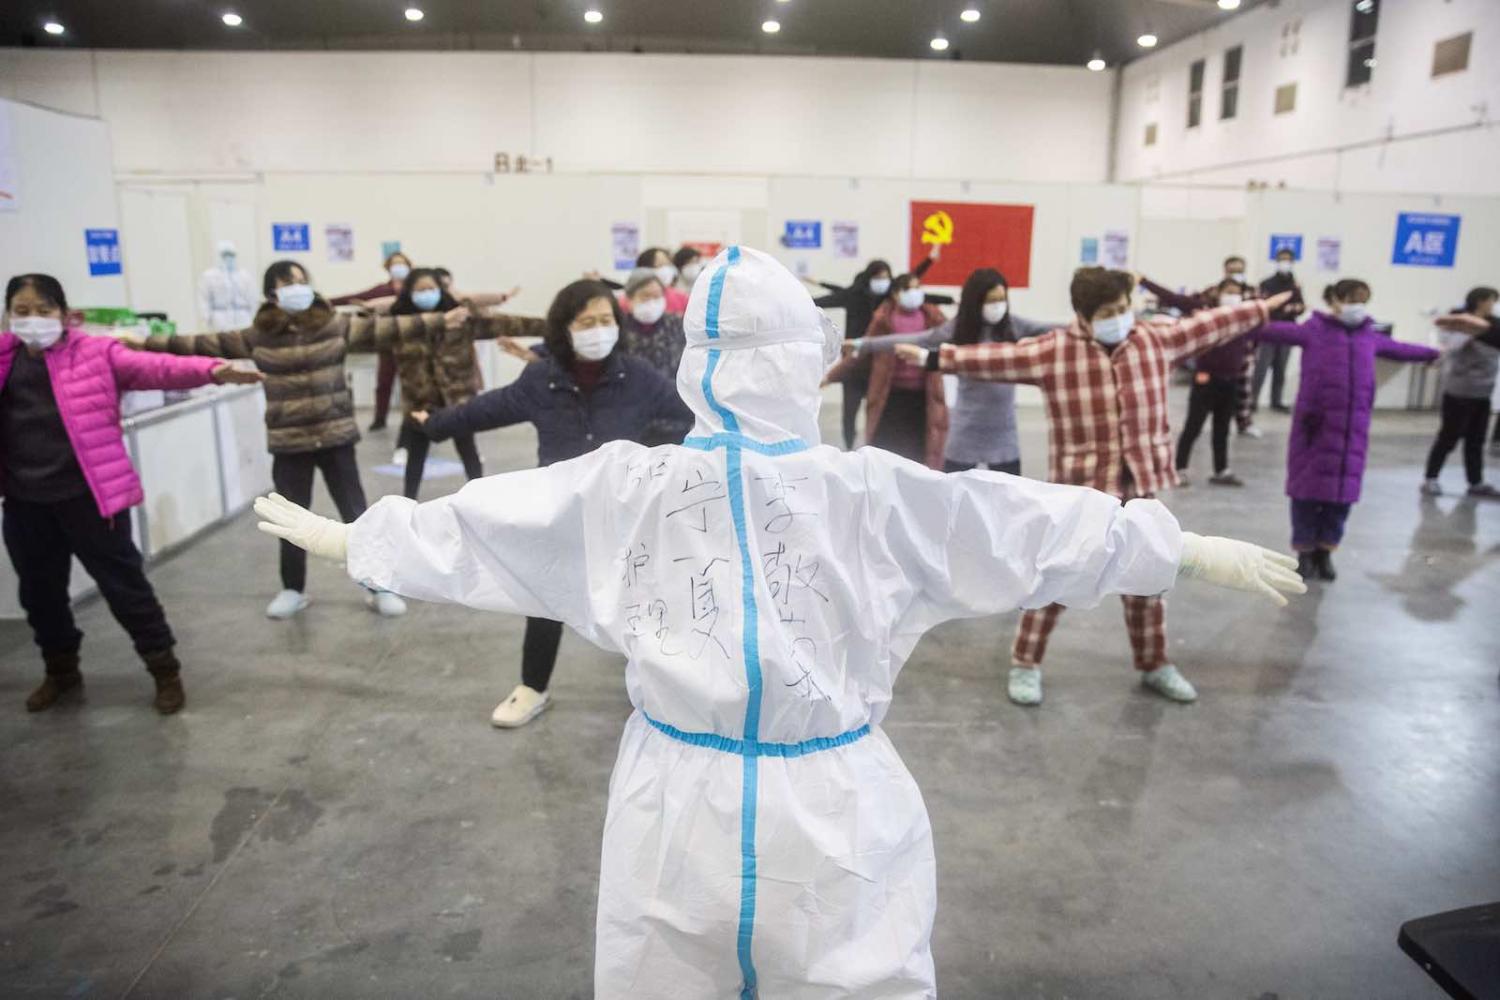 Medical staff lead patients with mild symptoms of the COVID-19 coronavirus in group exercises at an exhibition centre converted into a hospital in Wuhan, Hubei province (STR via Getty Images)